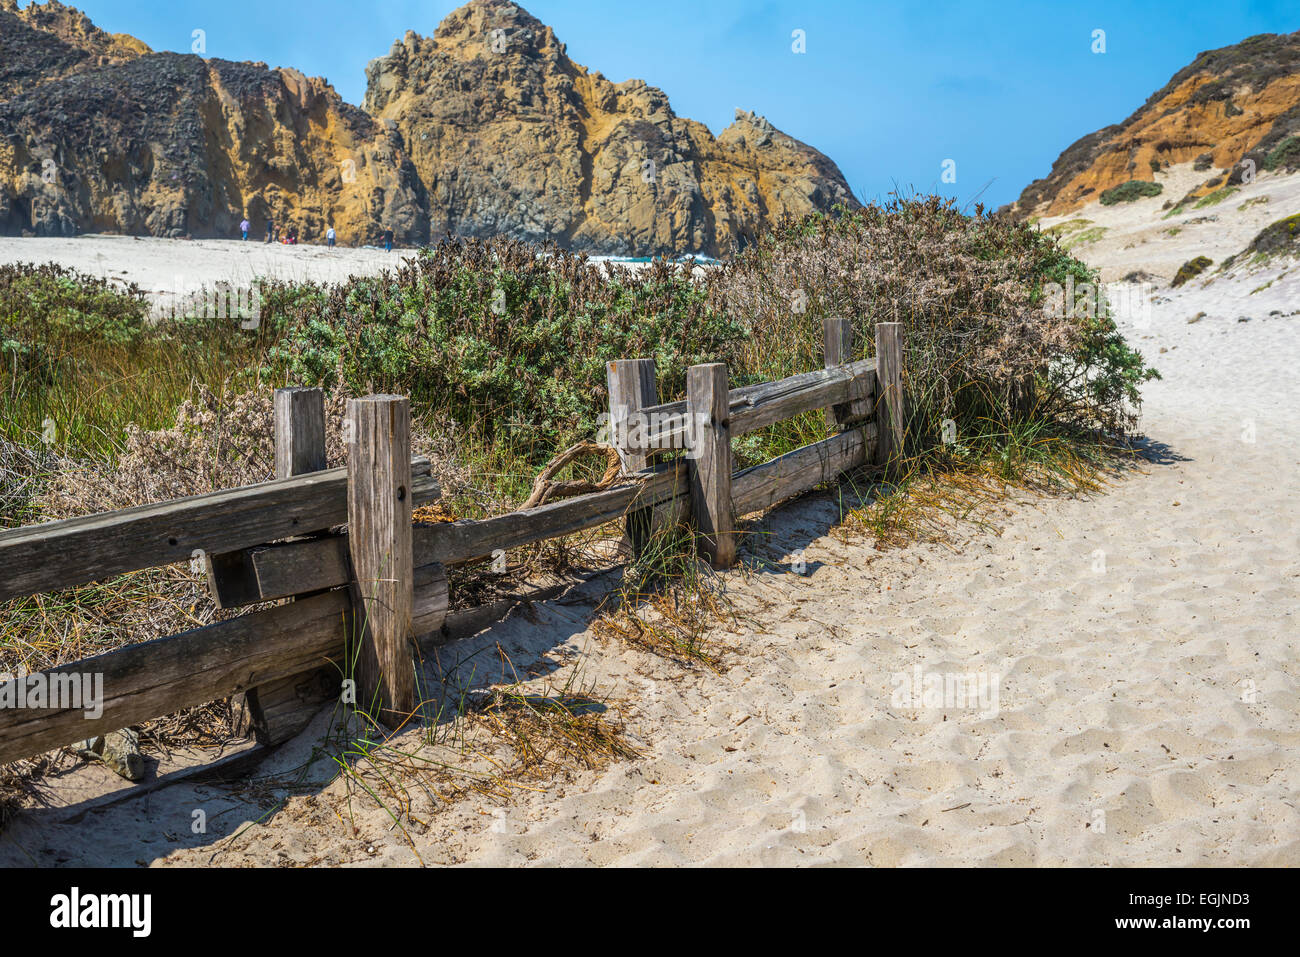 Wooden fence at Pfeiffer Beach. Pfeiffer Big Sur State Park, California, United States. Stock Photo